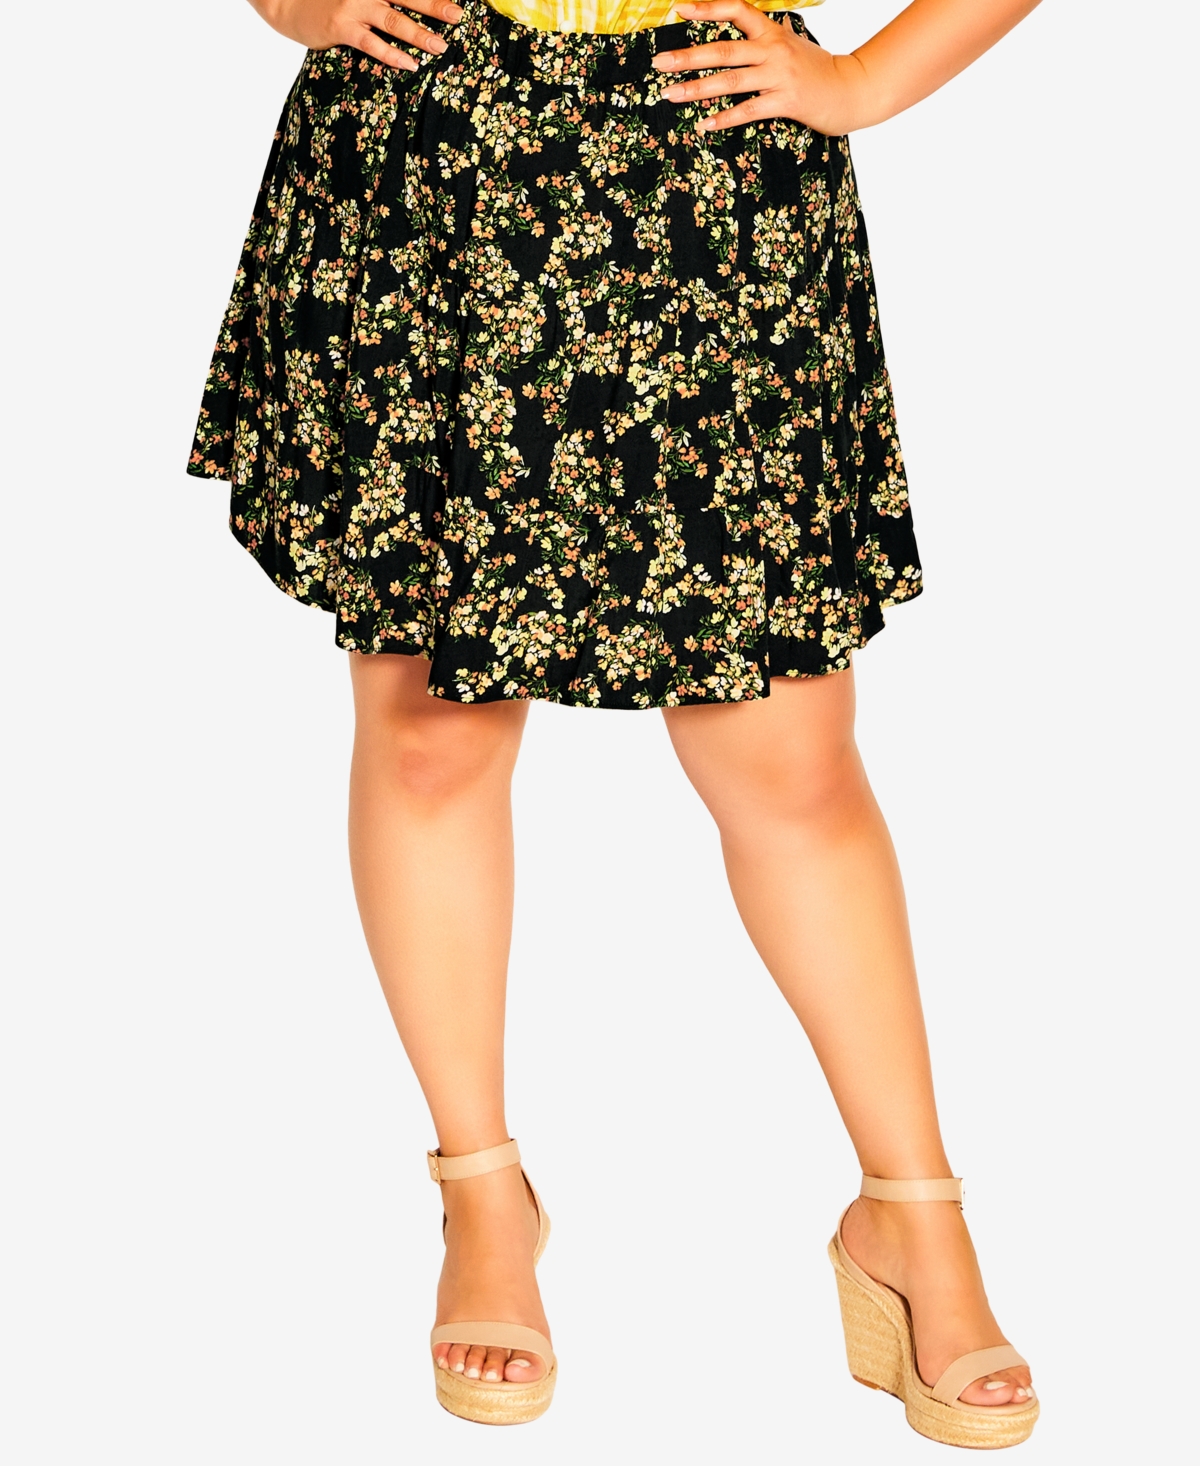 CITY CHIC TRENDY PLUS SIZE SORRENTO FLORAL SKIRT